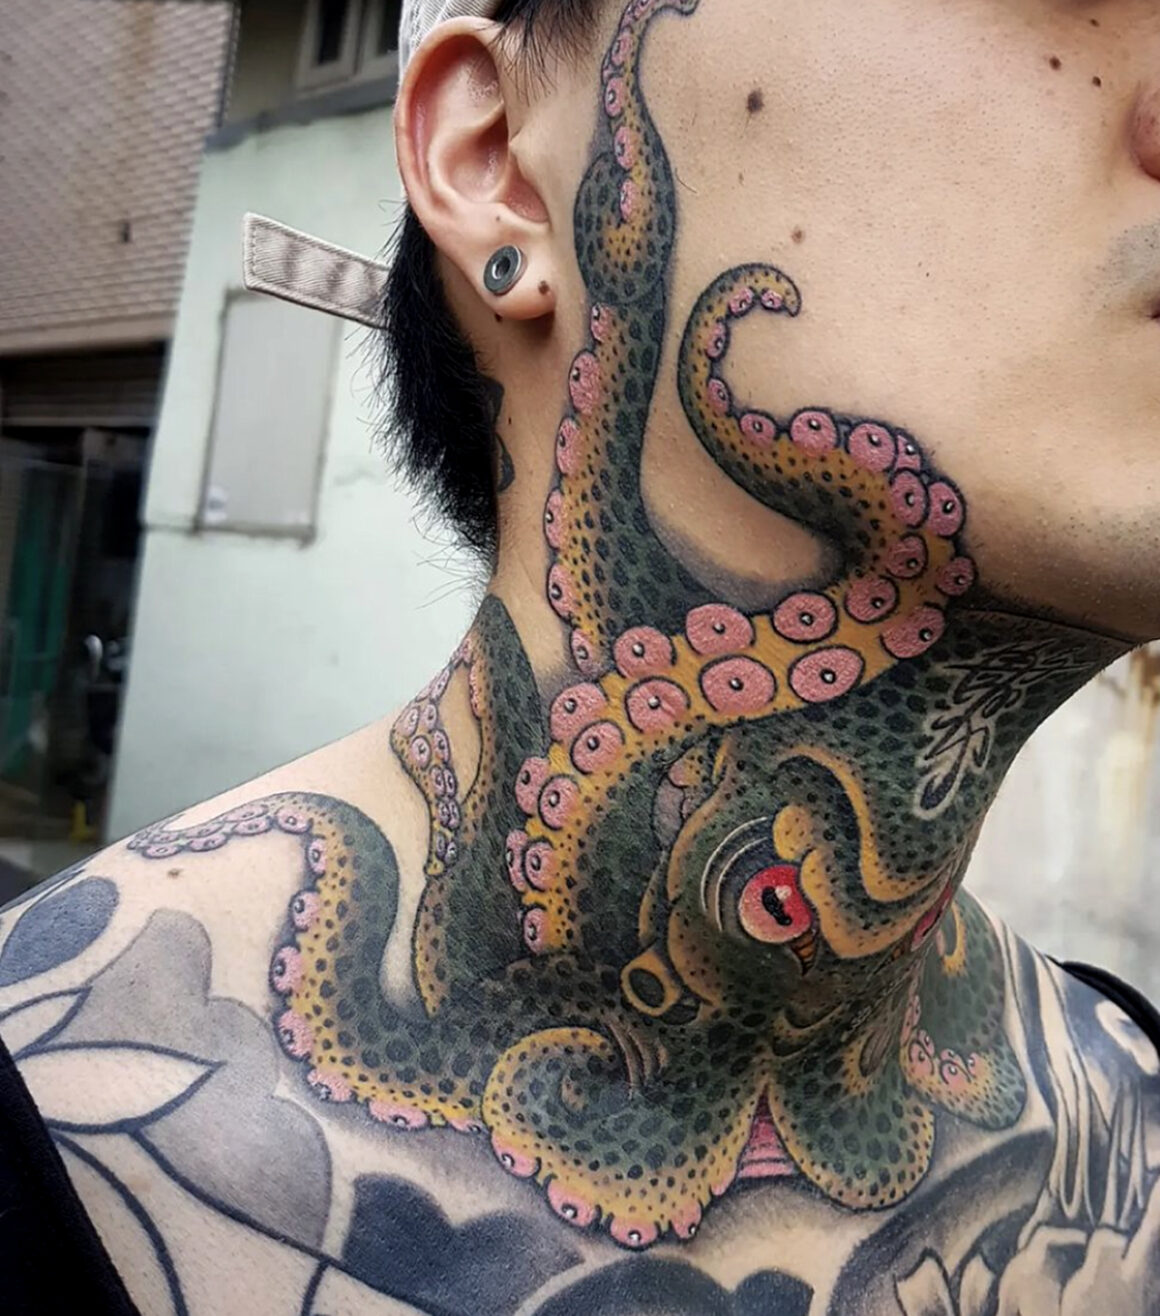 finished up this traditional octopus tattoo @certifiedtattoostudios 🖤 . .  #traditionaltattoo #tattootraditional #usatattoo #top_class... | Instagram